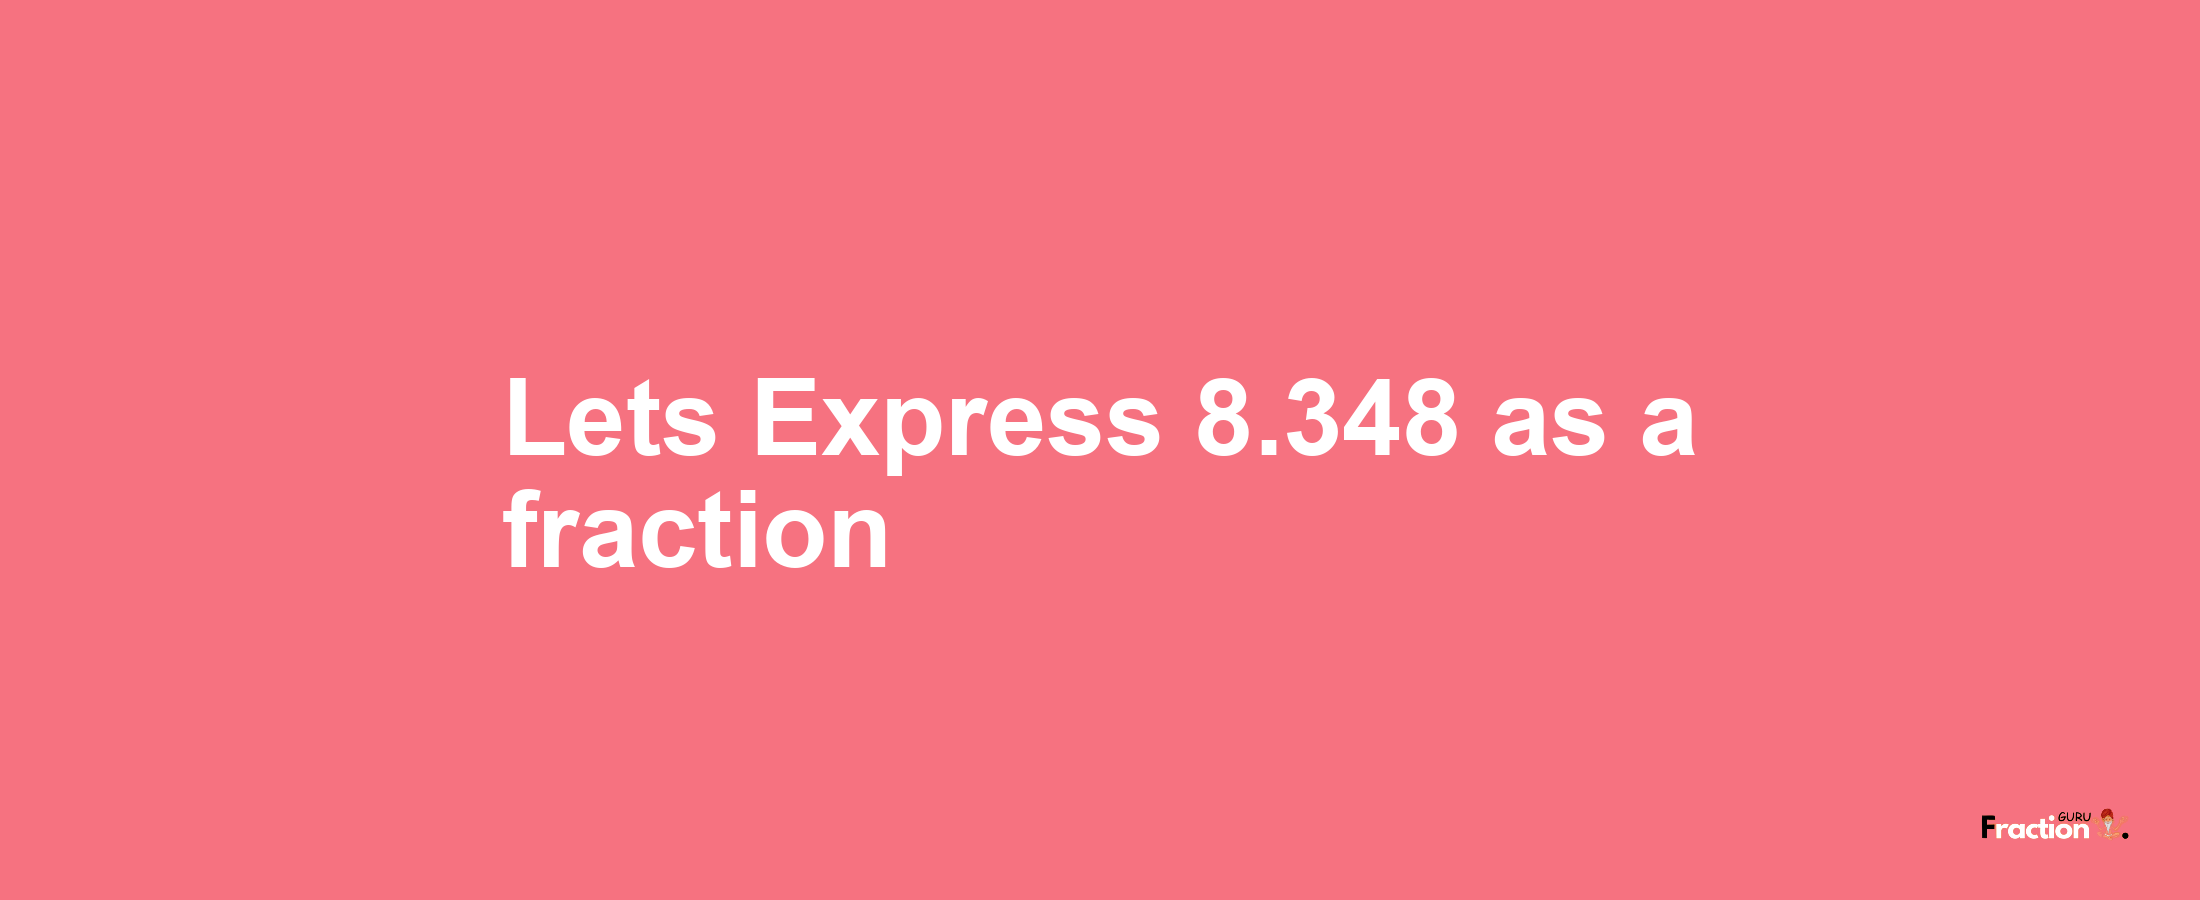 Lets Express 8.348 as afraction